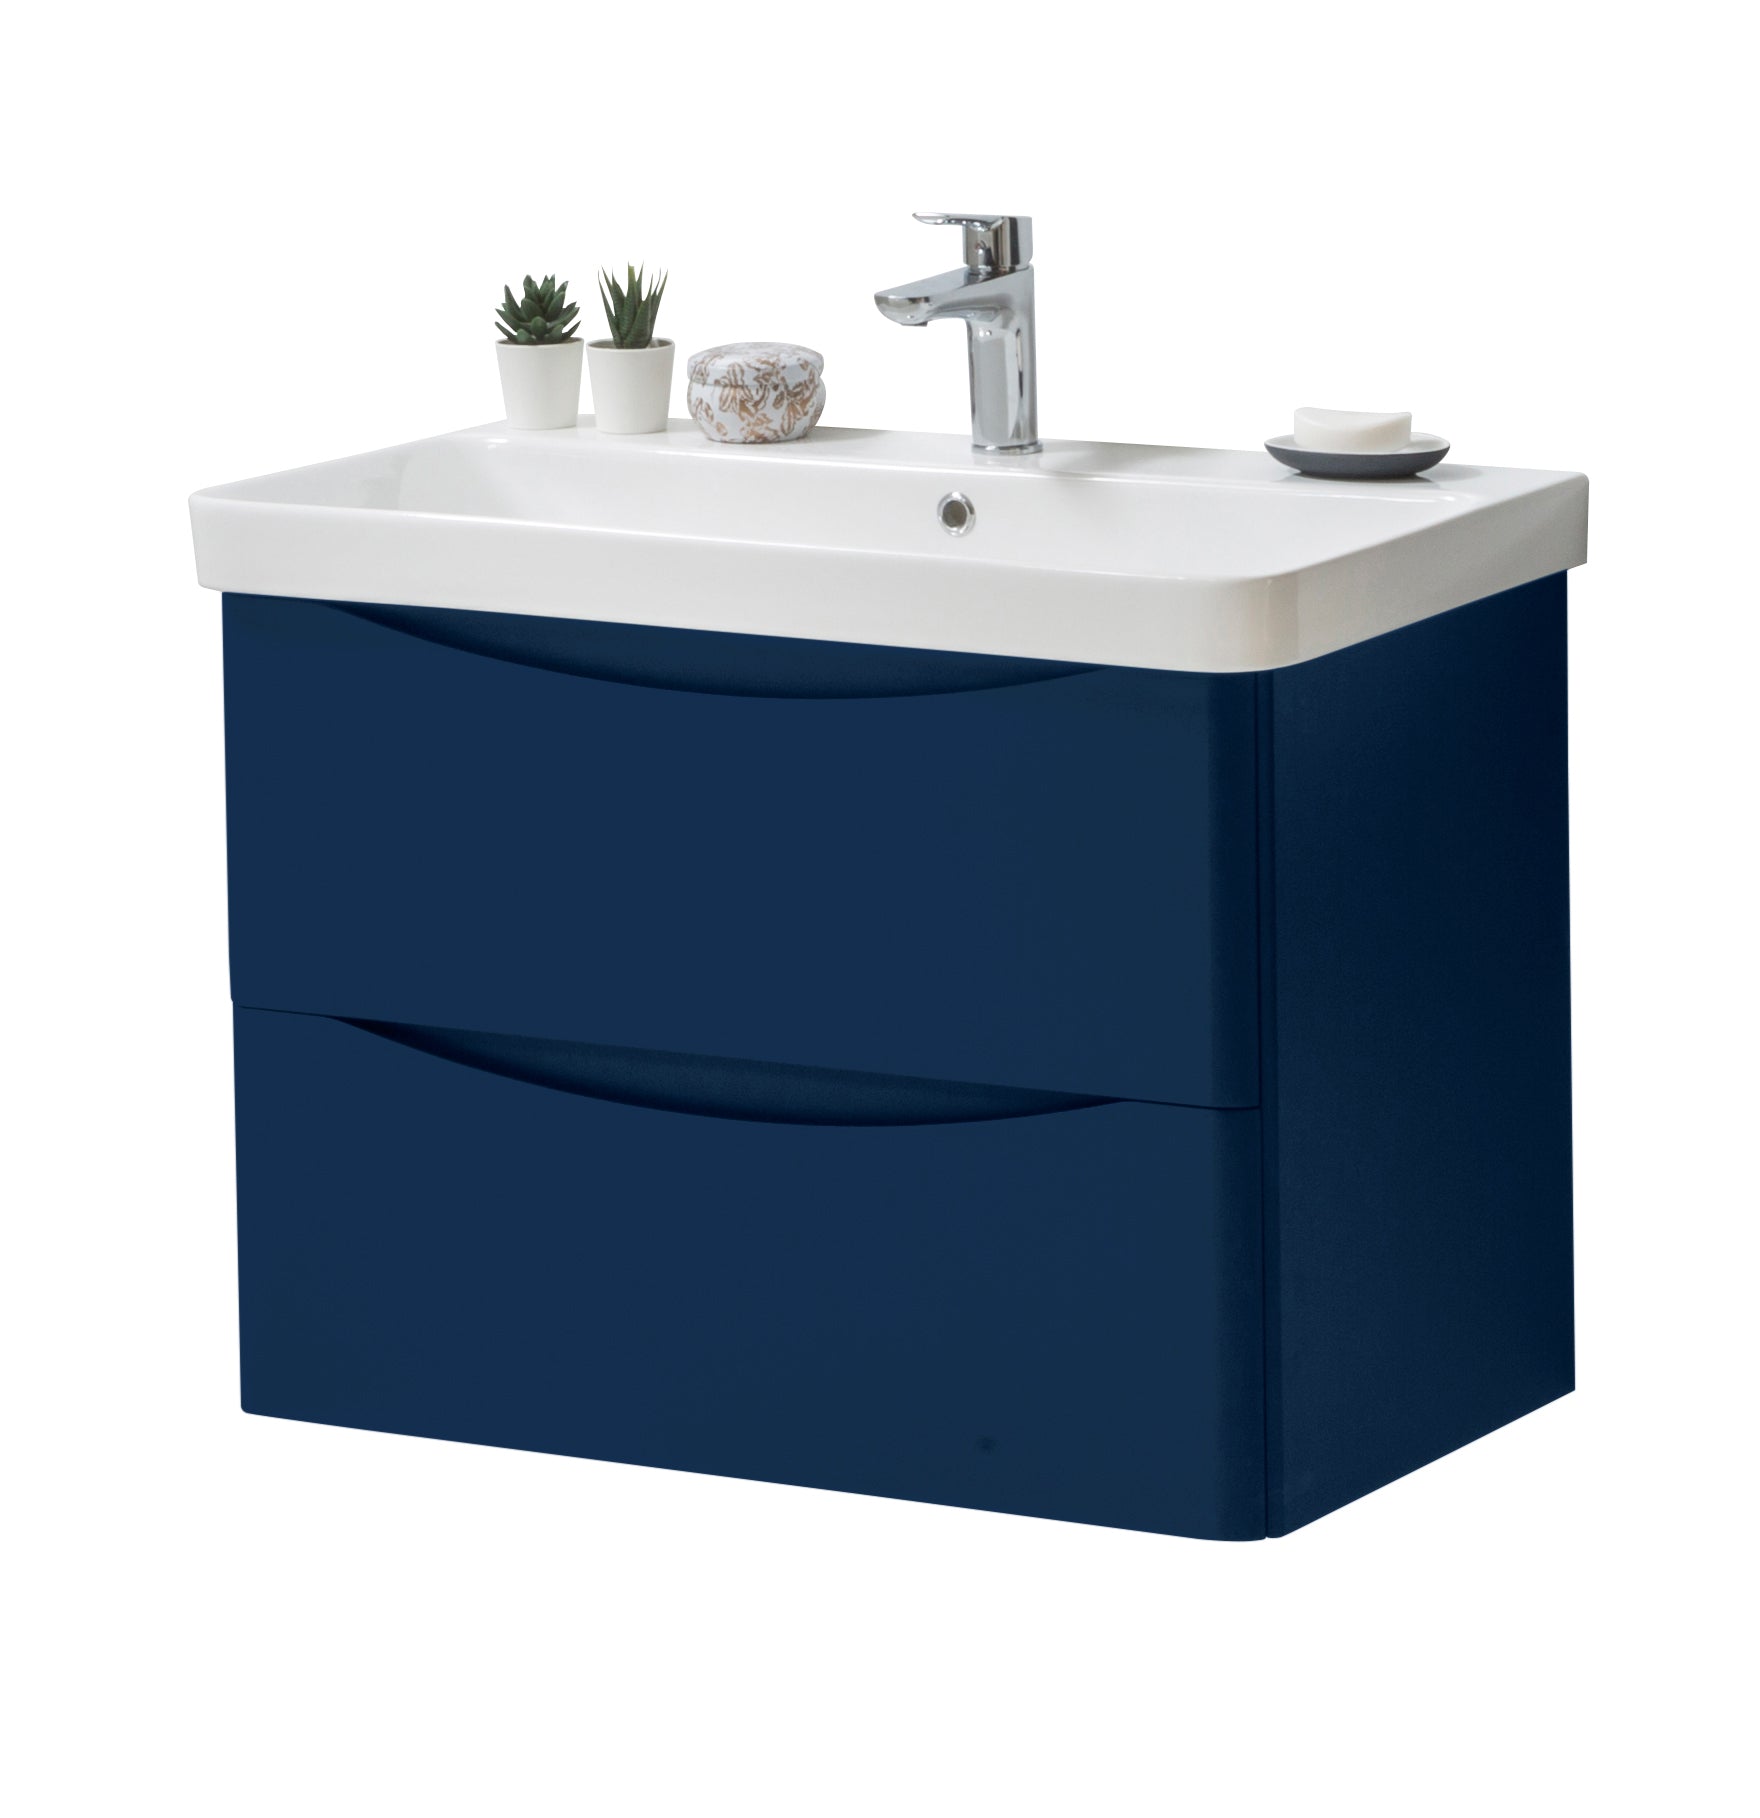 Kartell UK Cayo Blue 800mm Wall Mounted Drawer Unit with Basin